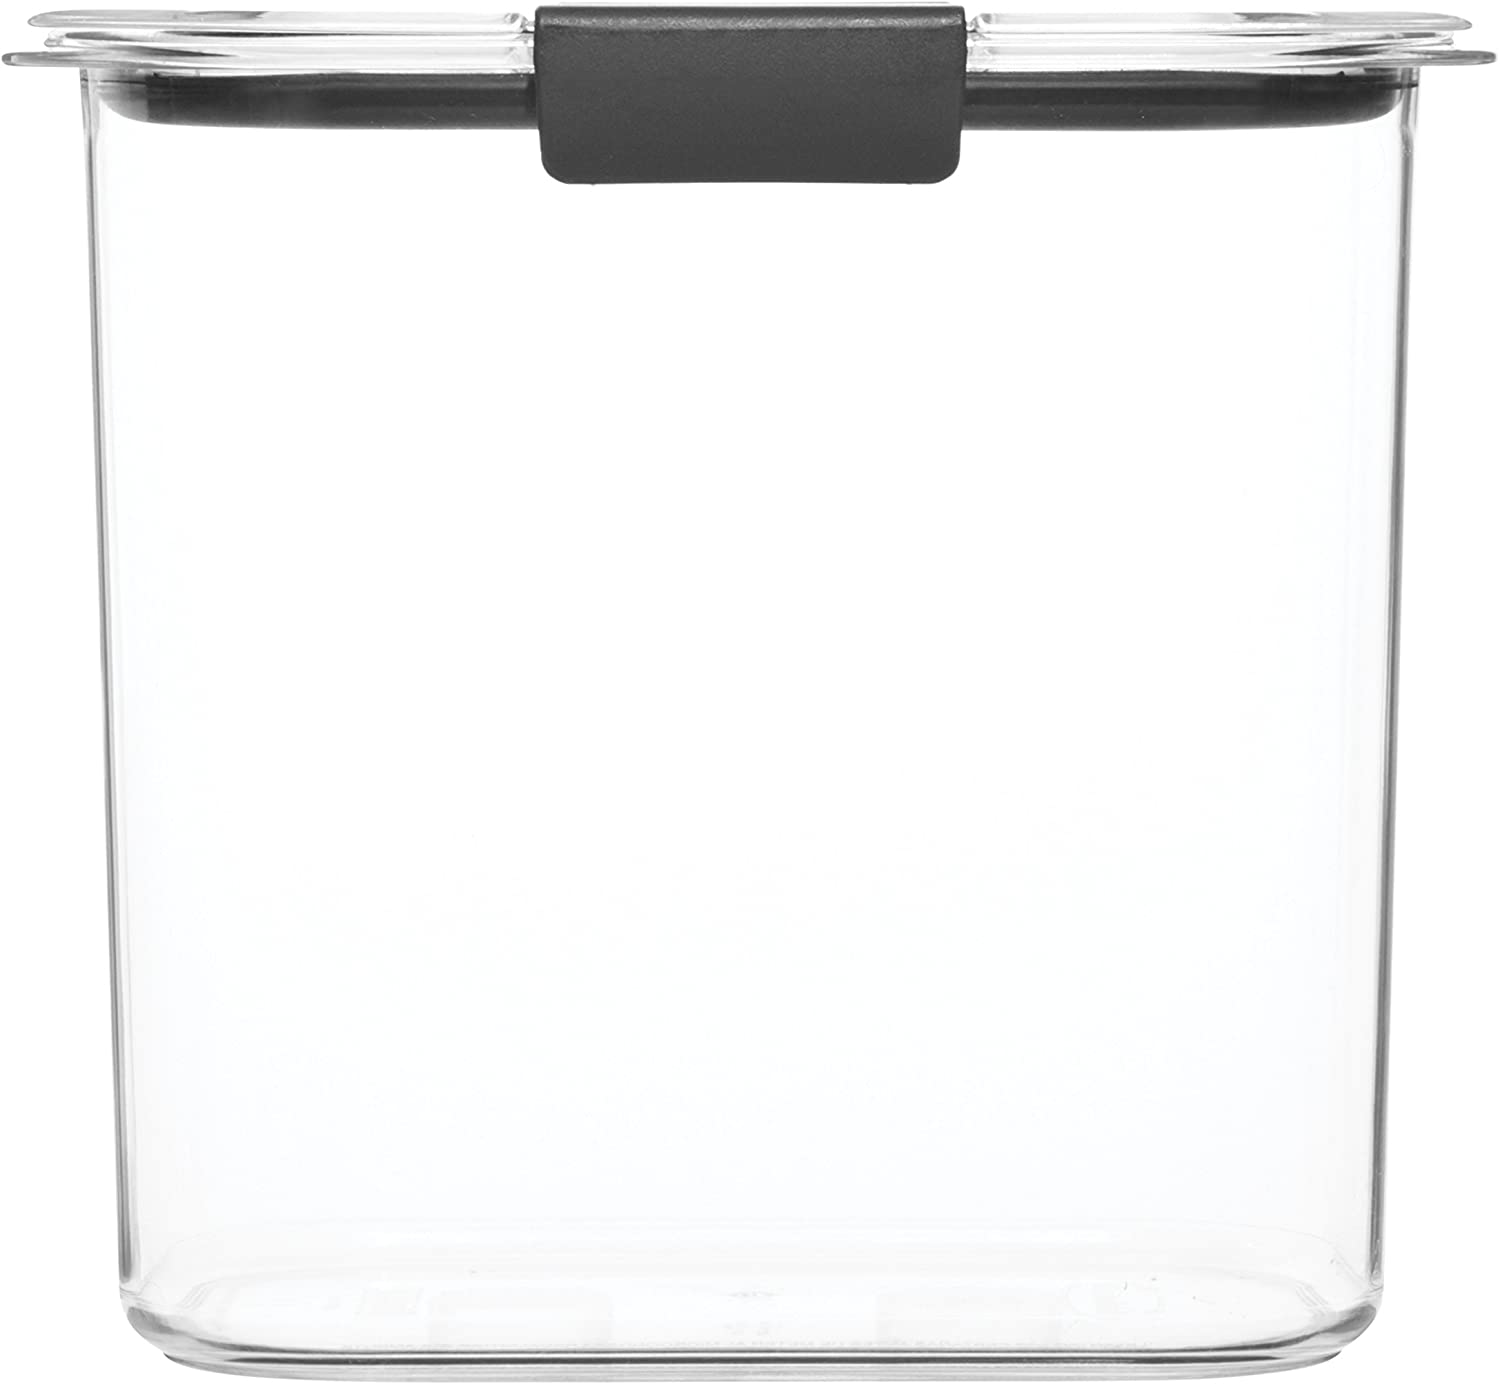 Rubbermaid Brilliance Pantry Airtight Food Storage Containers, Plastic, Sugar, 2.8 L - Whole and All